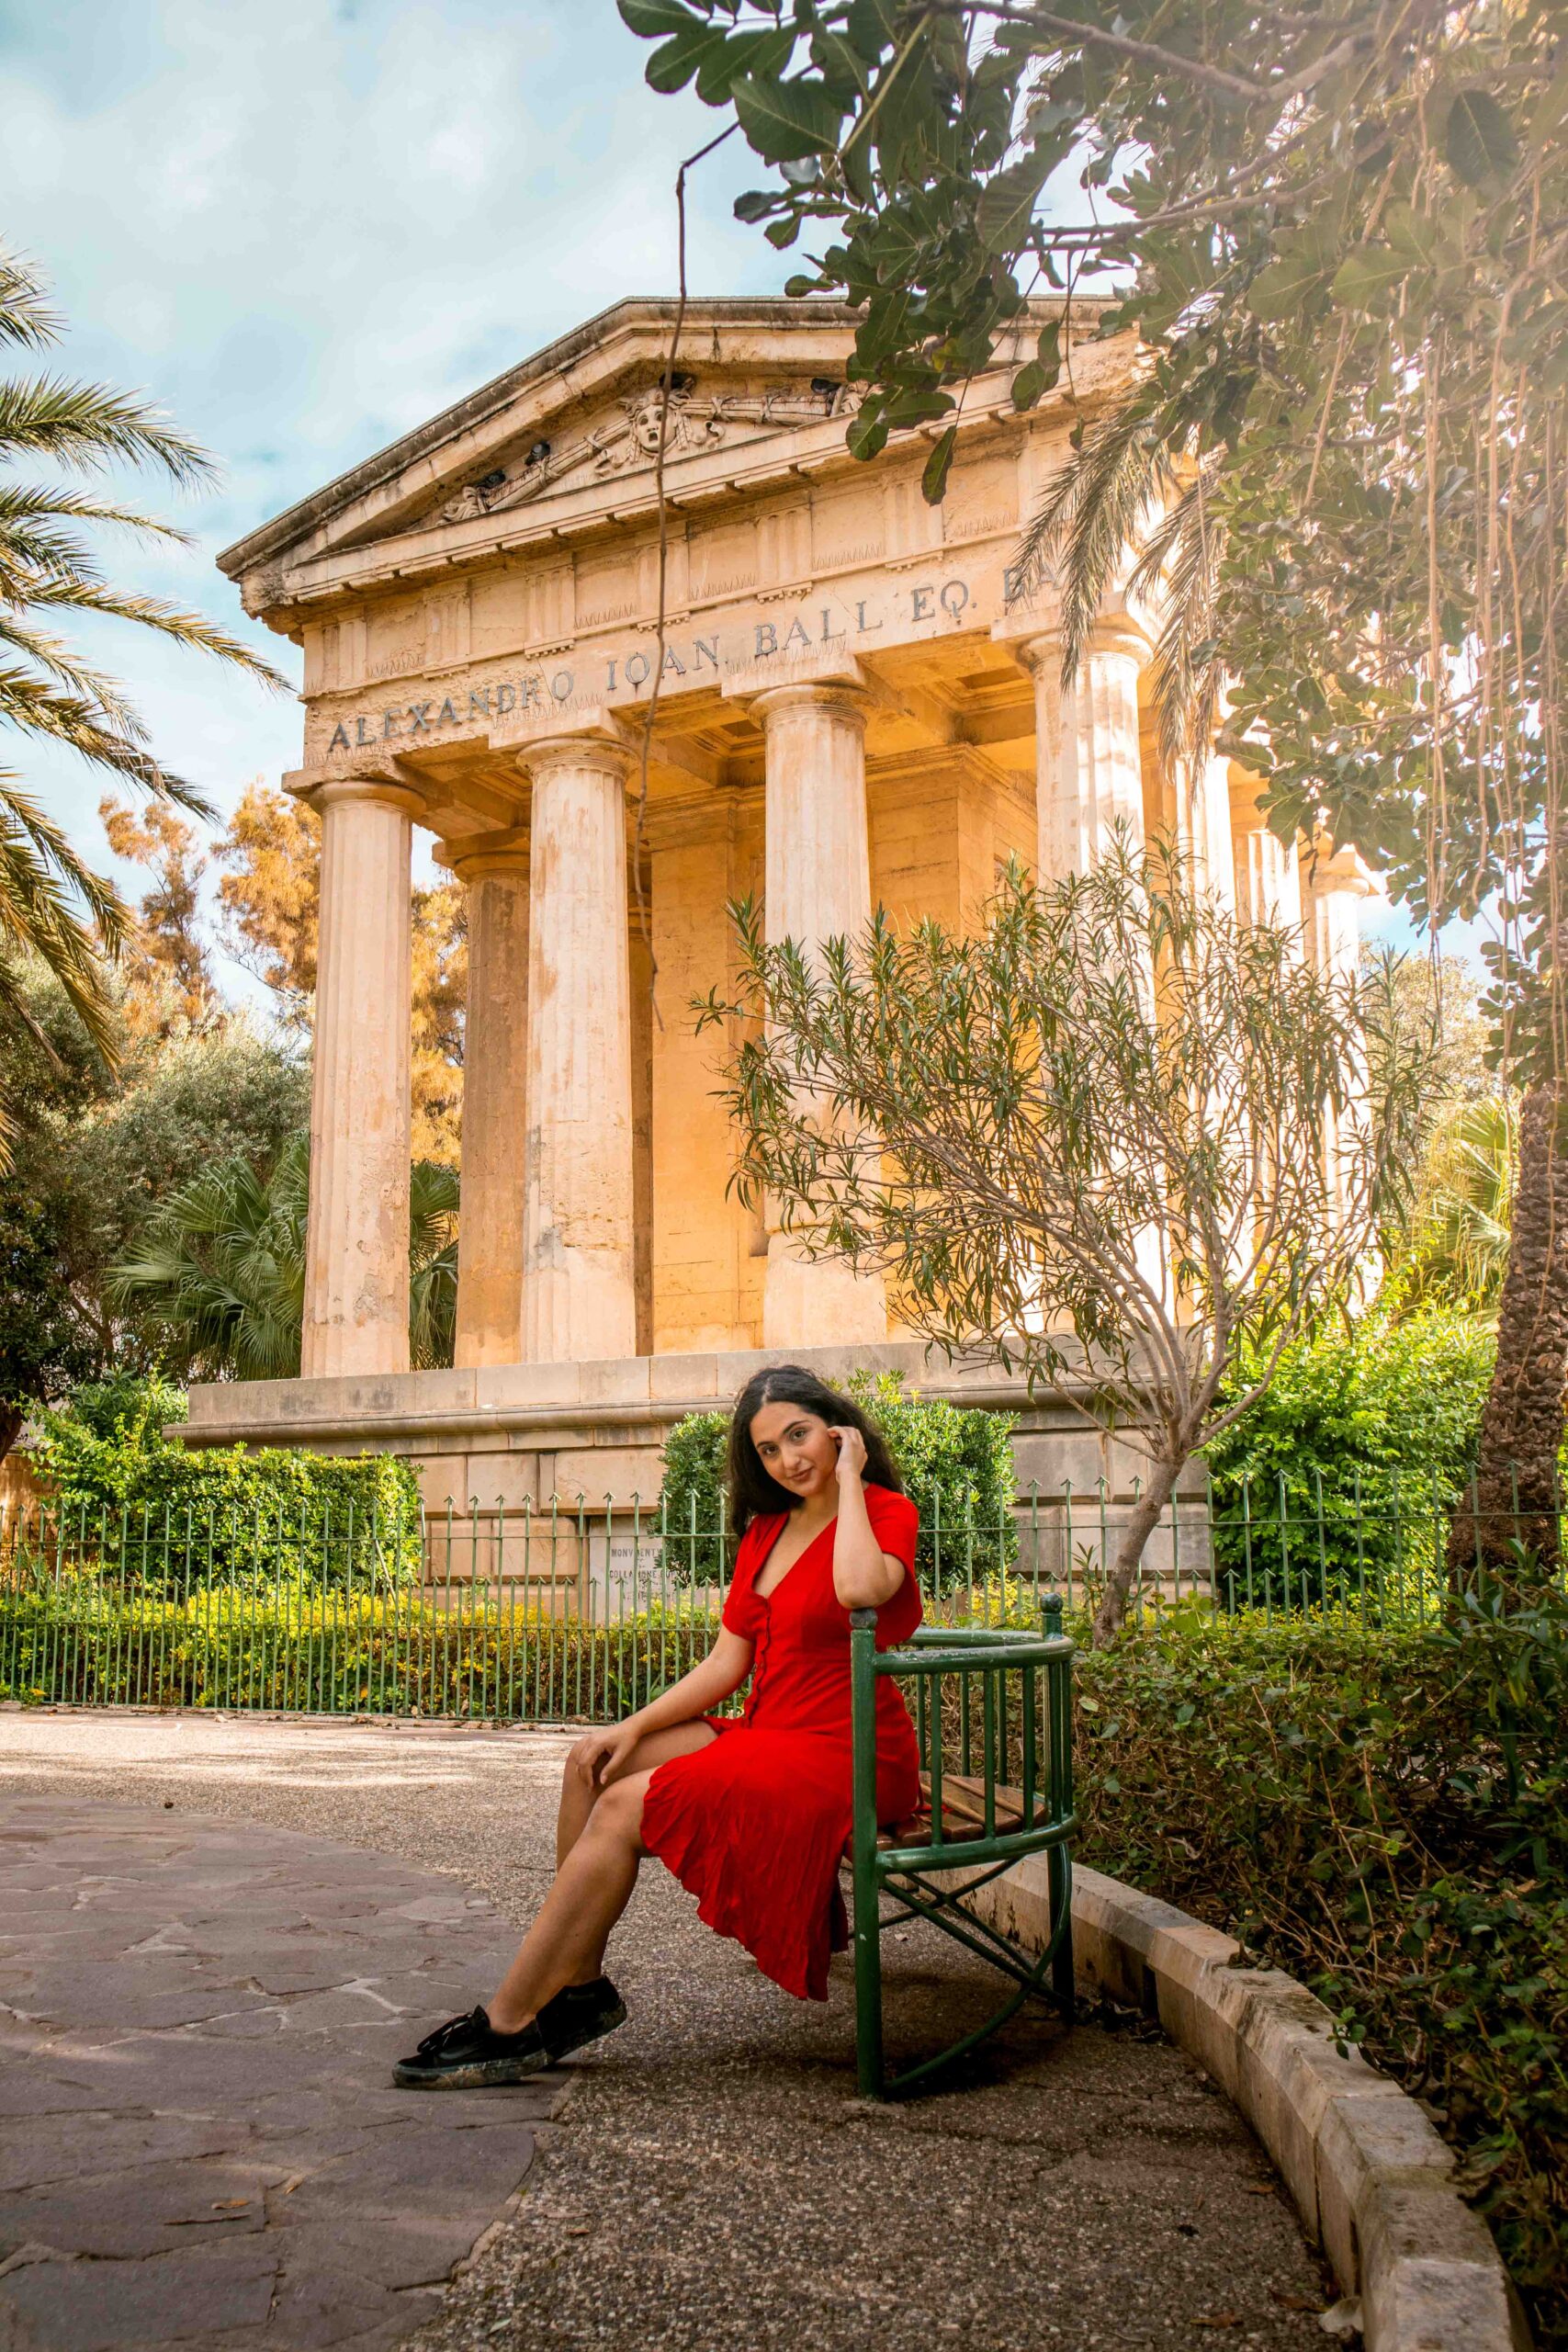 Woman wearing a red dress sitting on a bench in front of the Monument to Sir Alexander Ball in the Lower Barrakka Gardens in Valletta, Malta